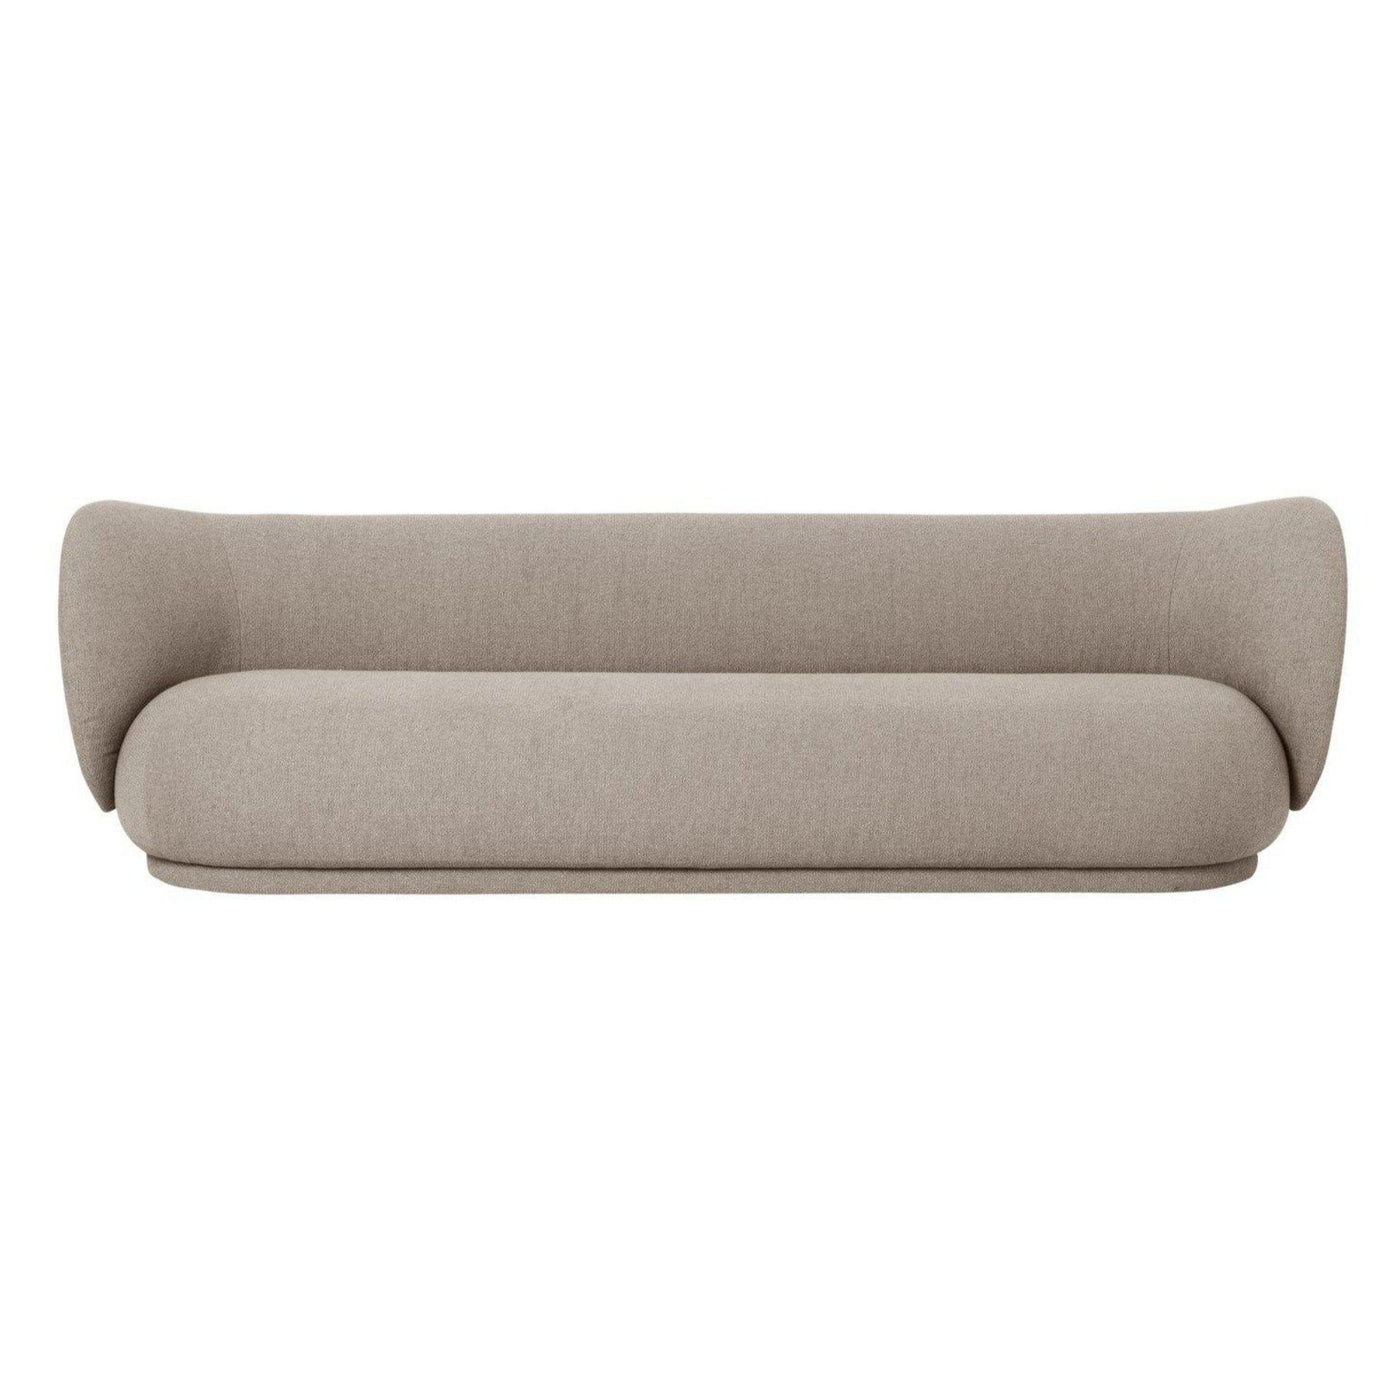 ferm living rico 4 seater sofa bouclé in sand. Available from someday designs bouclé. #colour_sand-boucle